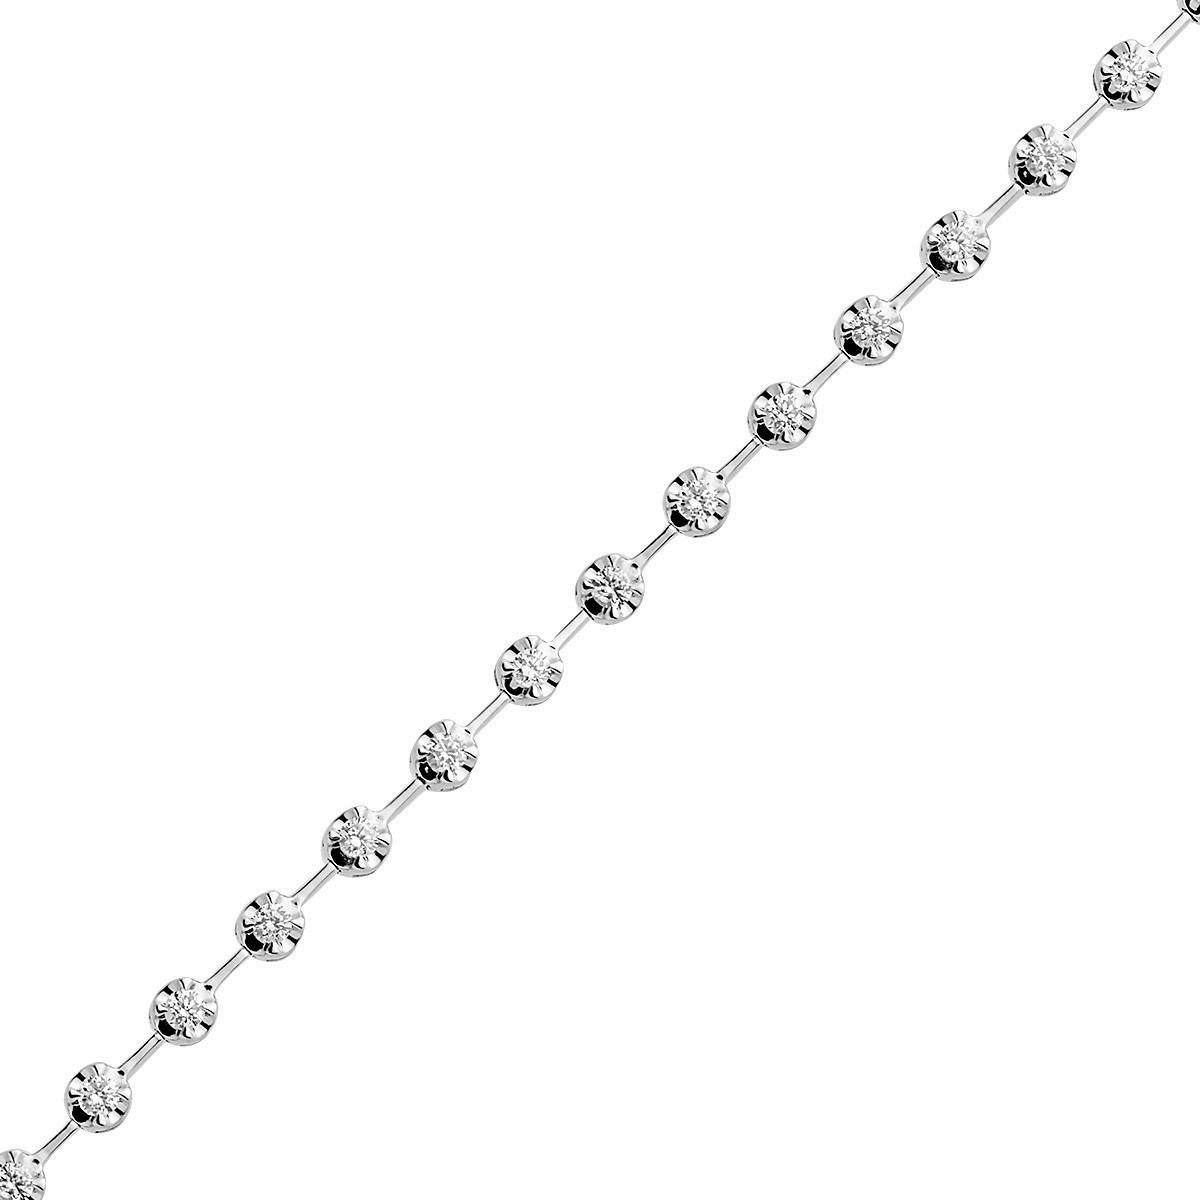 This beautiful bracelet gives a new appearance to the classic tennis bracelet. This 18 karat white gold bracelet weighing 7.7 grams has 30 round VS2, G color diamonds totaling 0.96 carats. 